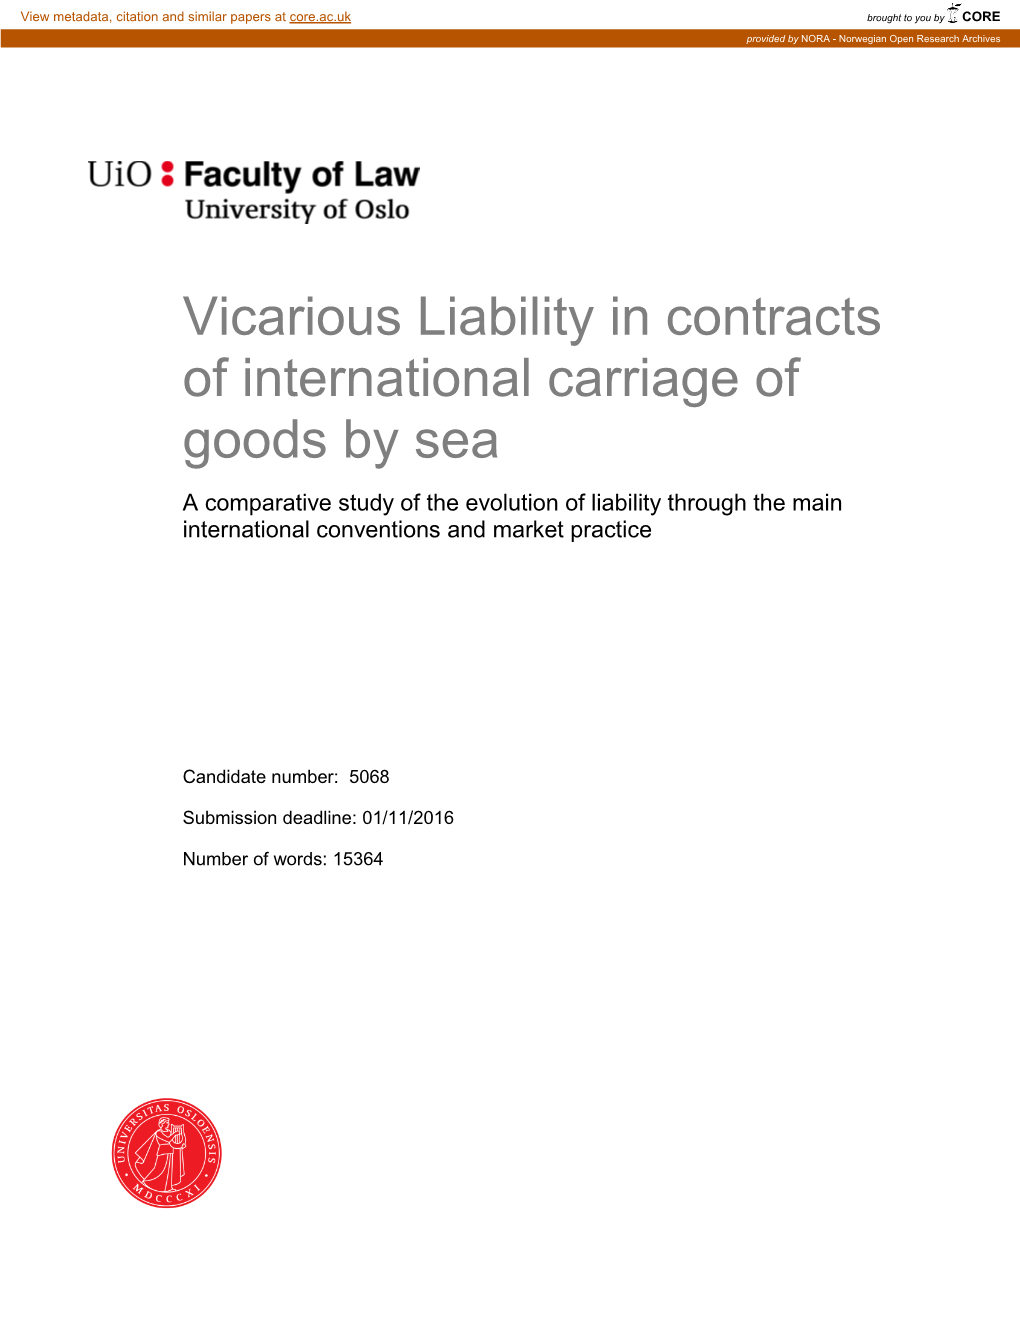 Vicarious Liability in Contracts of International Carriage of Goods By